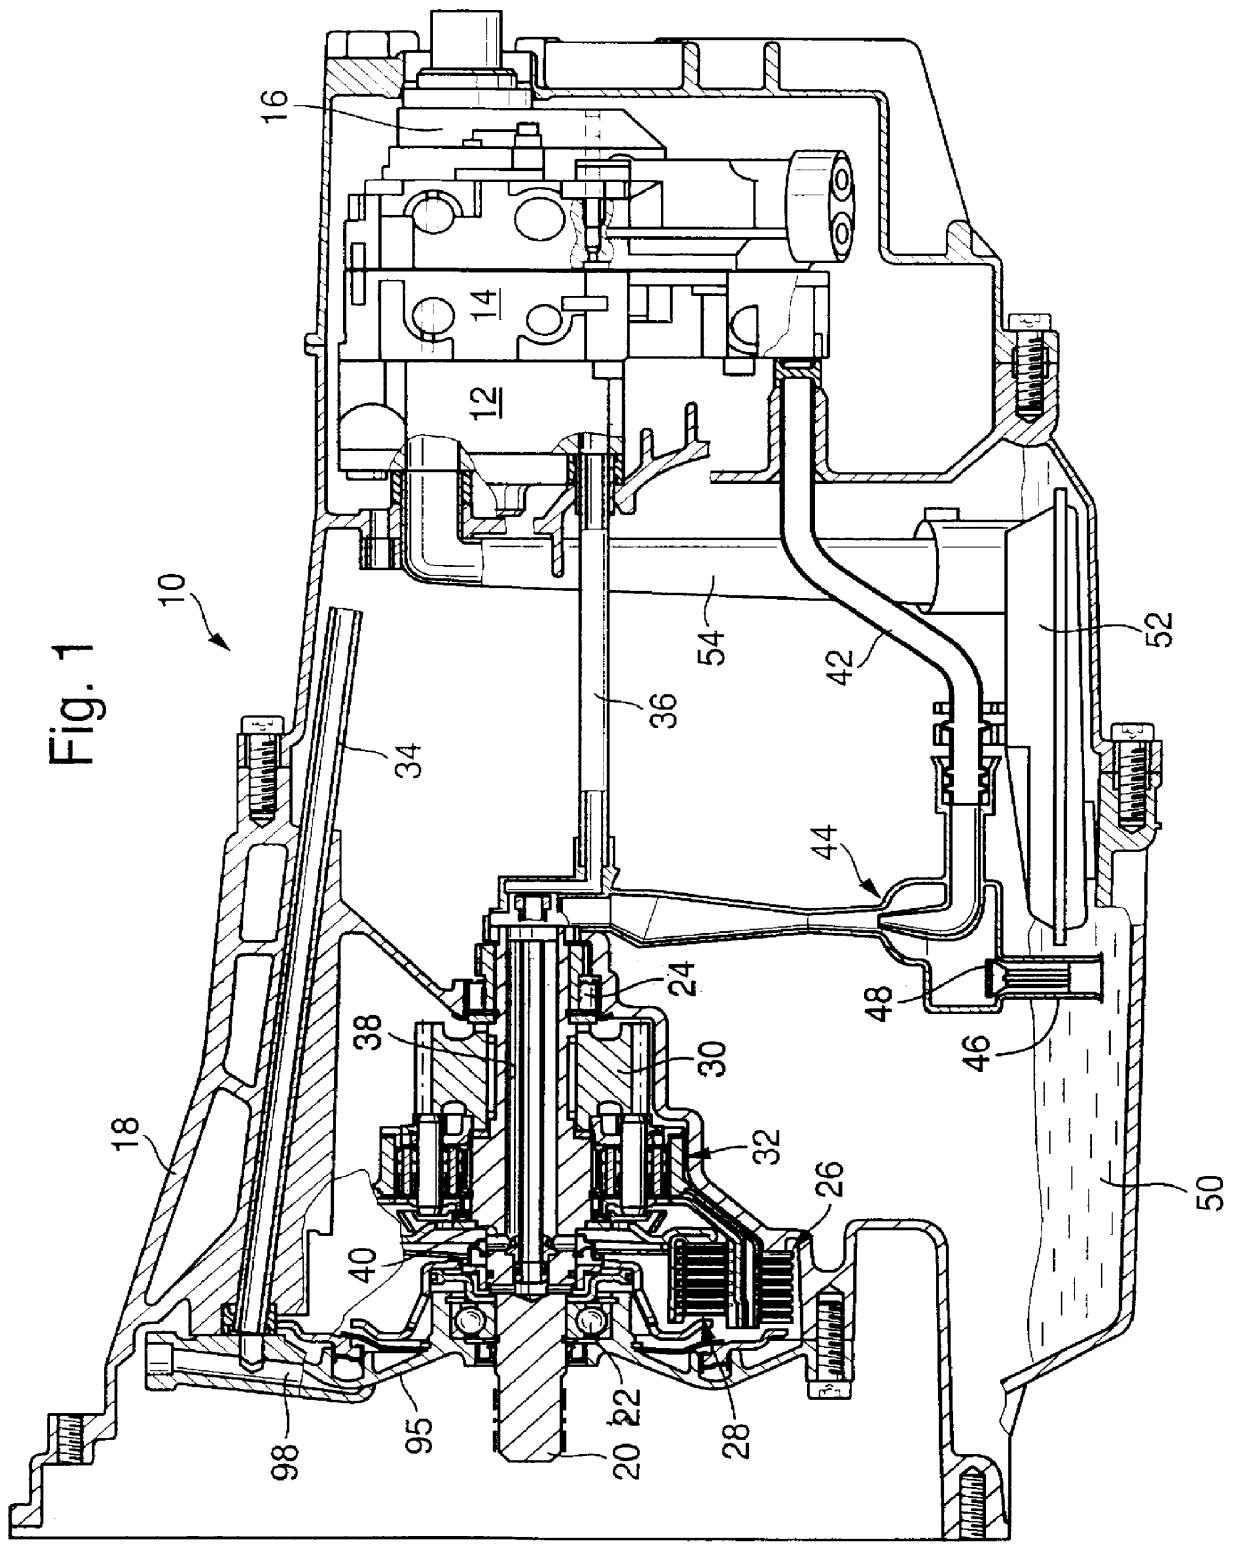 Apparatus for cooling clutches on a transmission shaft